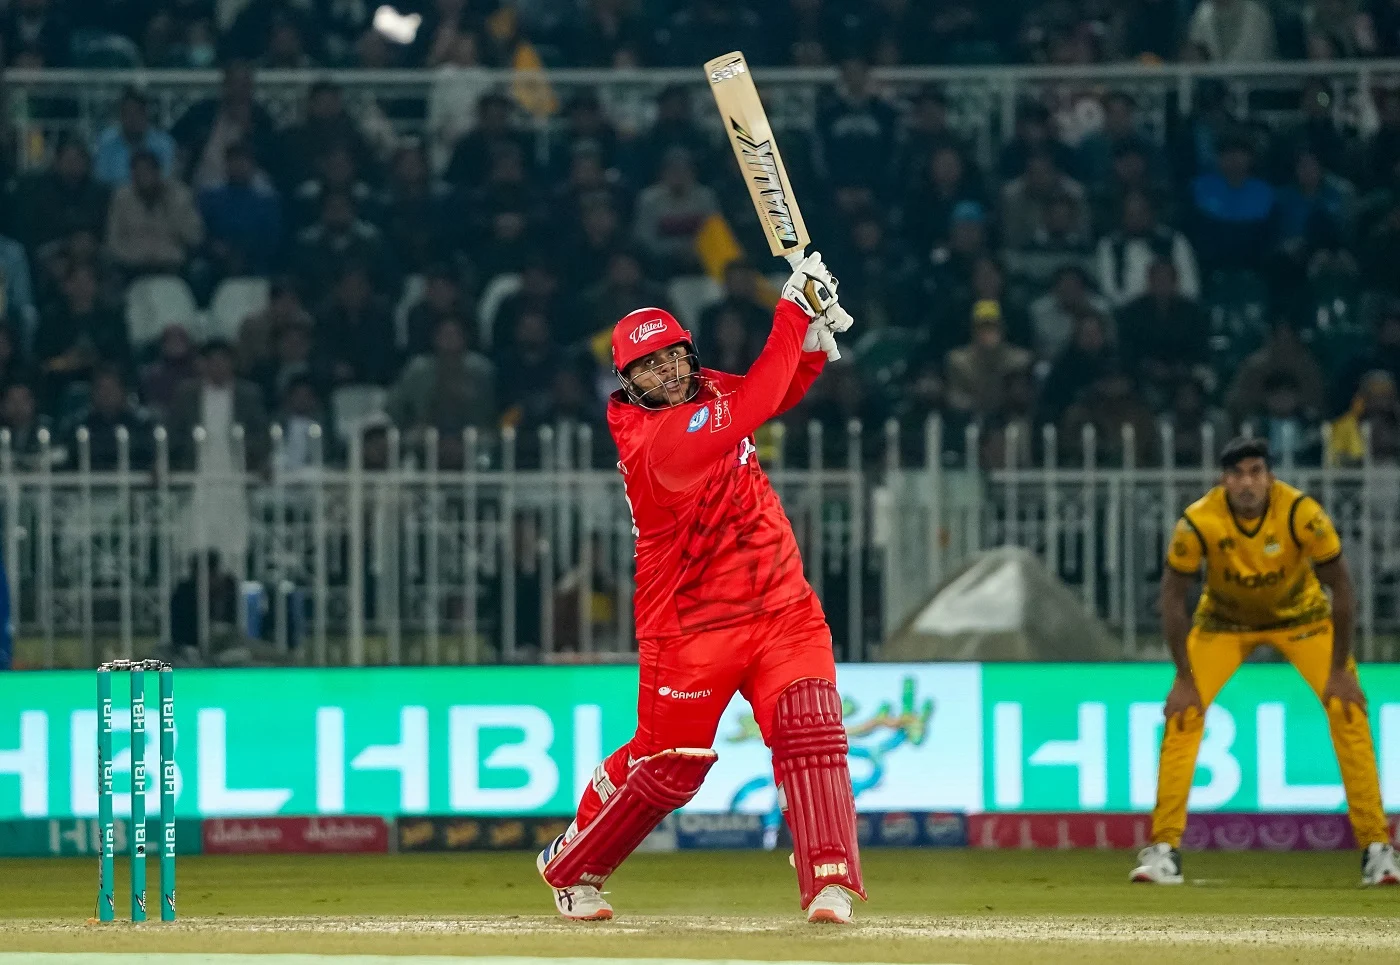 Overall his credentials in franchise cricket speak volumes of his prowess, accumulating 3183 runs at an astonishing strike-rate of 147.56 in 148 innings.The Promise of Potential as a Finisher

Despite setbacks, Azam Khan's exceptional striking ability positions him as a crucial asset for Pakistan's T20I squad, poised to leave a lasting impact.

In the last CPL season, Azam's exploits with the Guyana Warriors further underscored his potential as a game-changer. Scoring 224 runs in 12 innings at an astonishing strike rate of 155.55, he played an instrumental role in his team's title triumph.